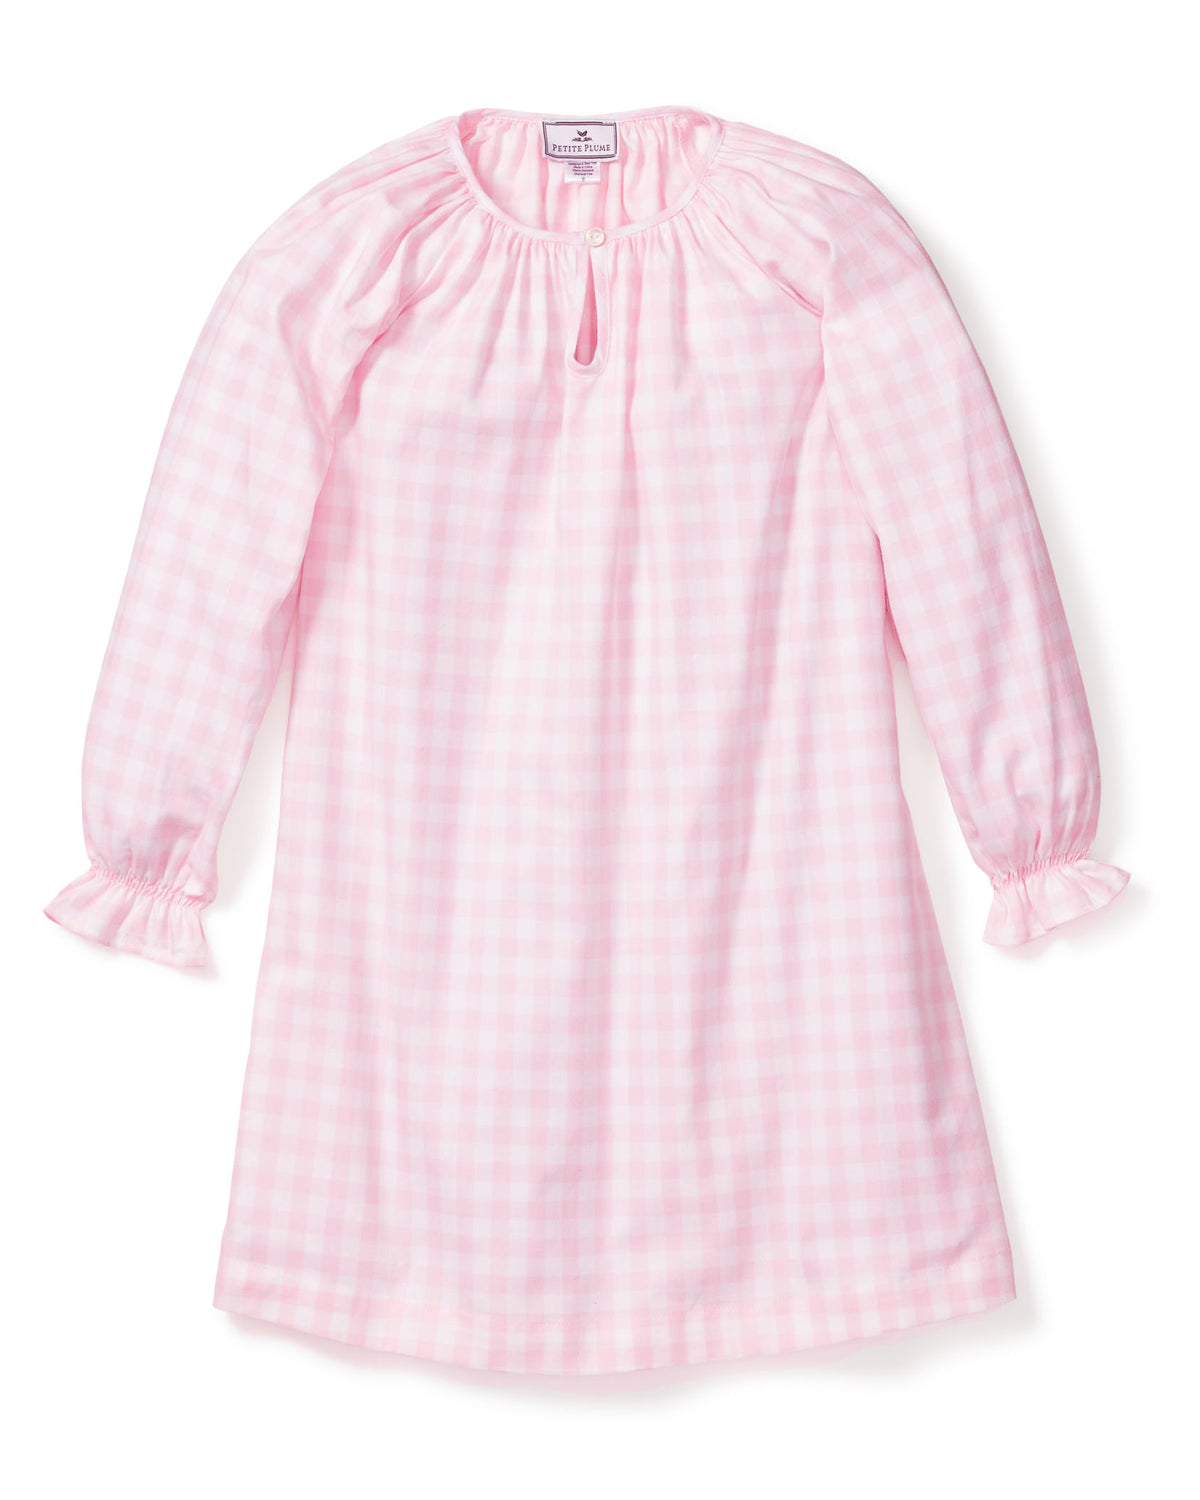 Pink Gingham Delphine Nightgown